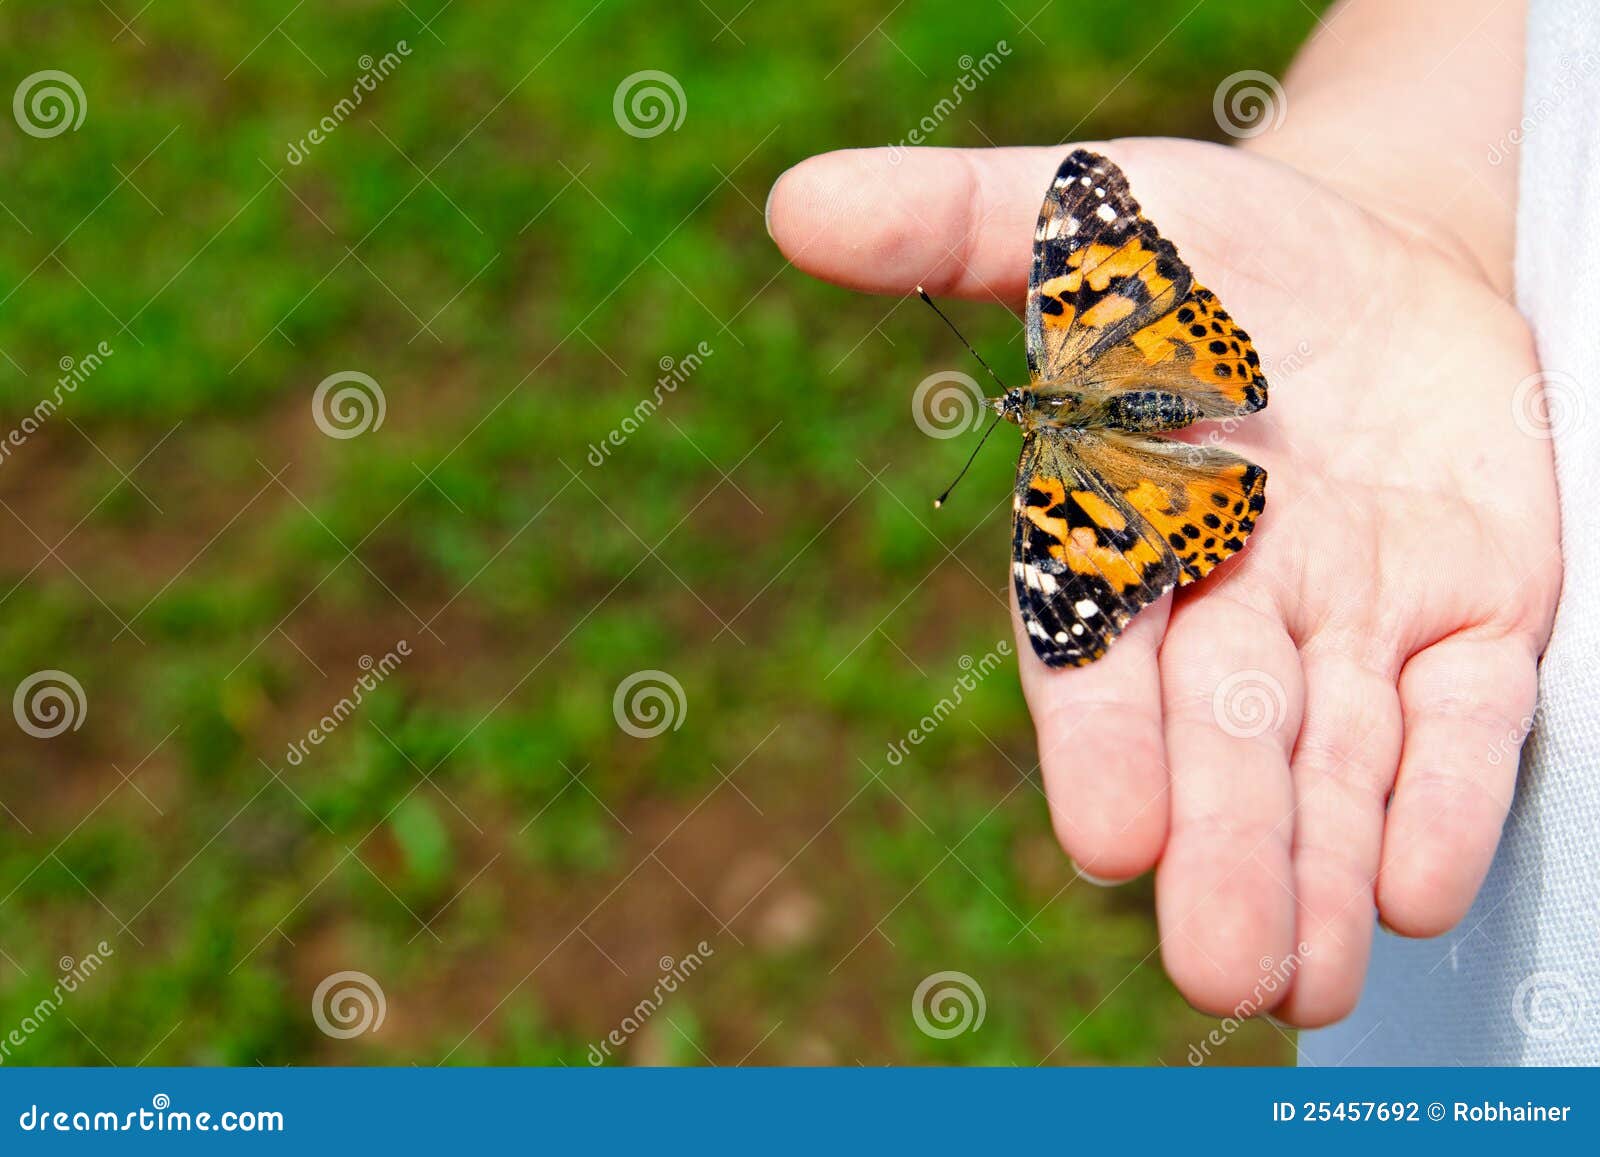 close up of child holding butterfly